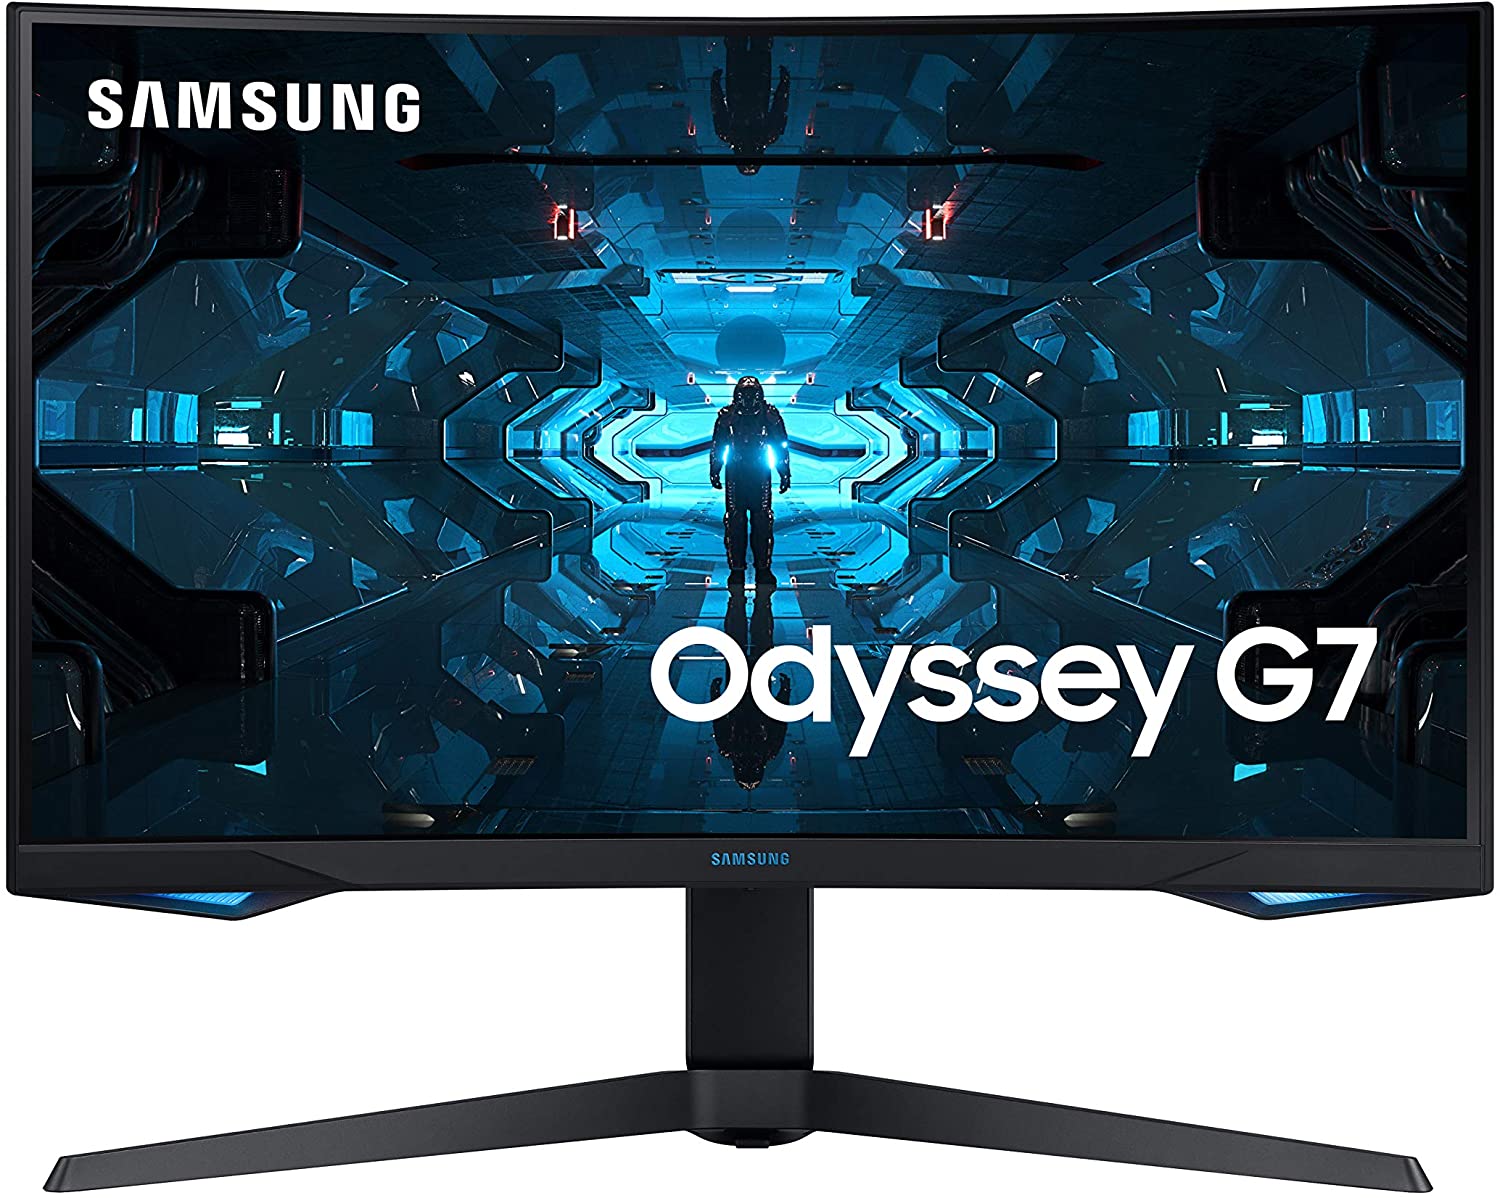 samsung odyssey g7 top monitors for 2021 image 